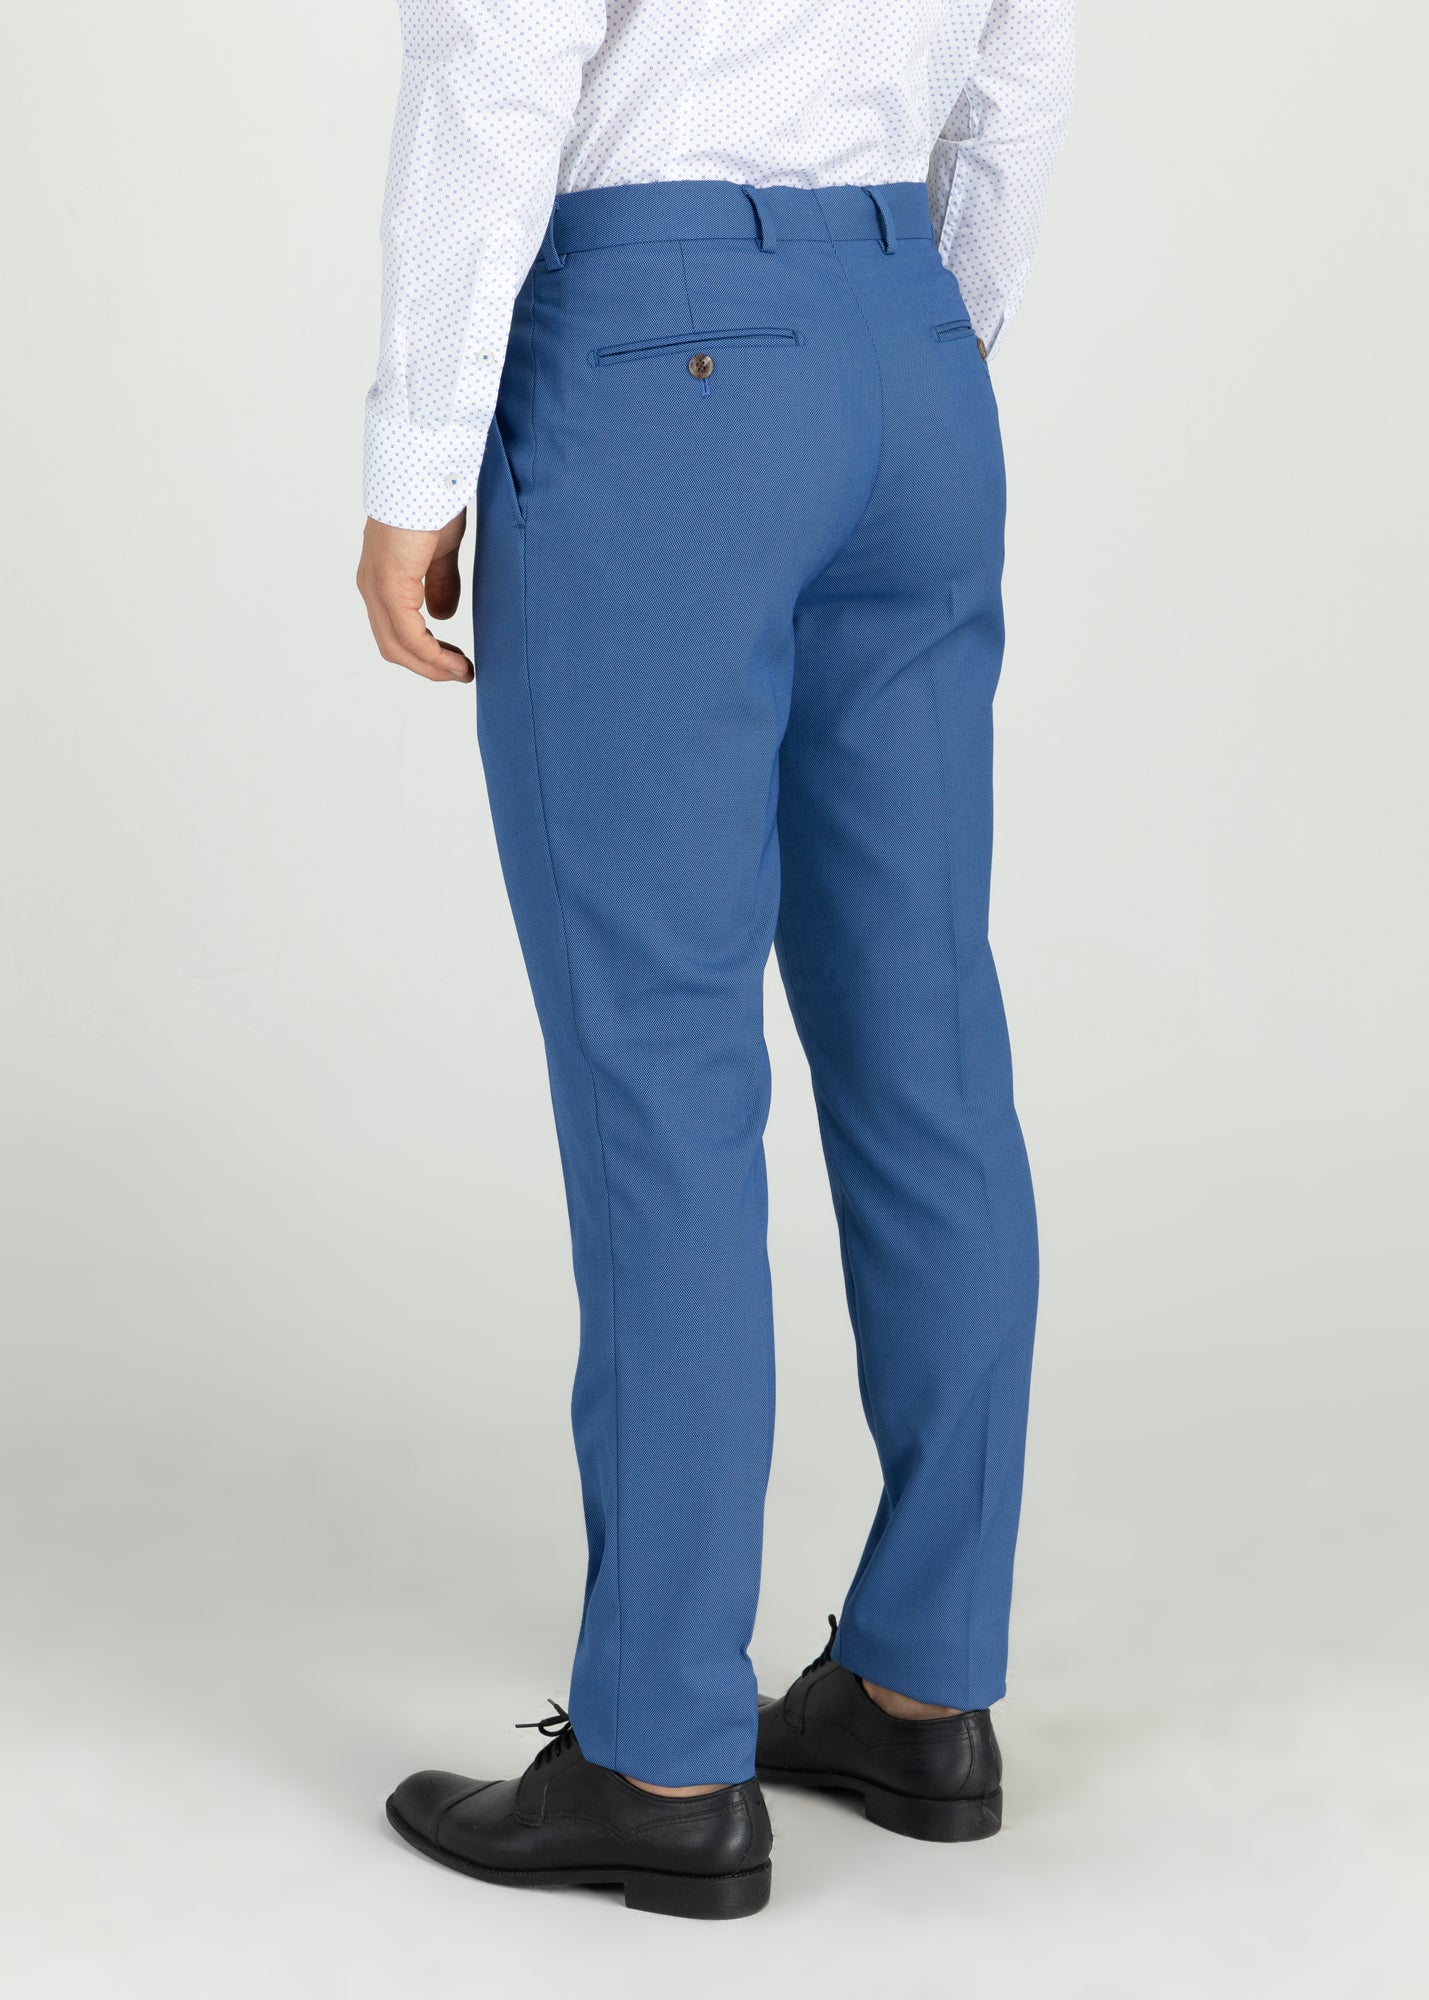 Extra-Slim Fit Trousers in Textured Stretch Fabric